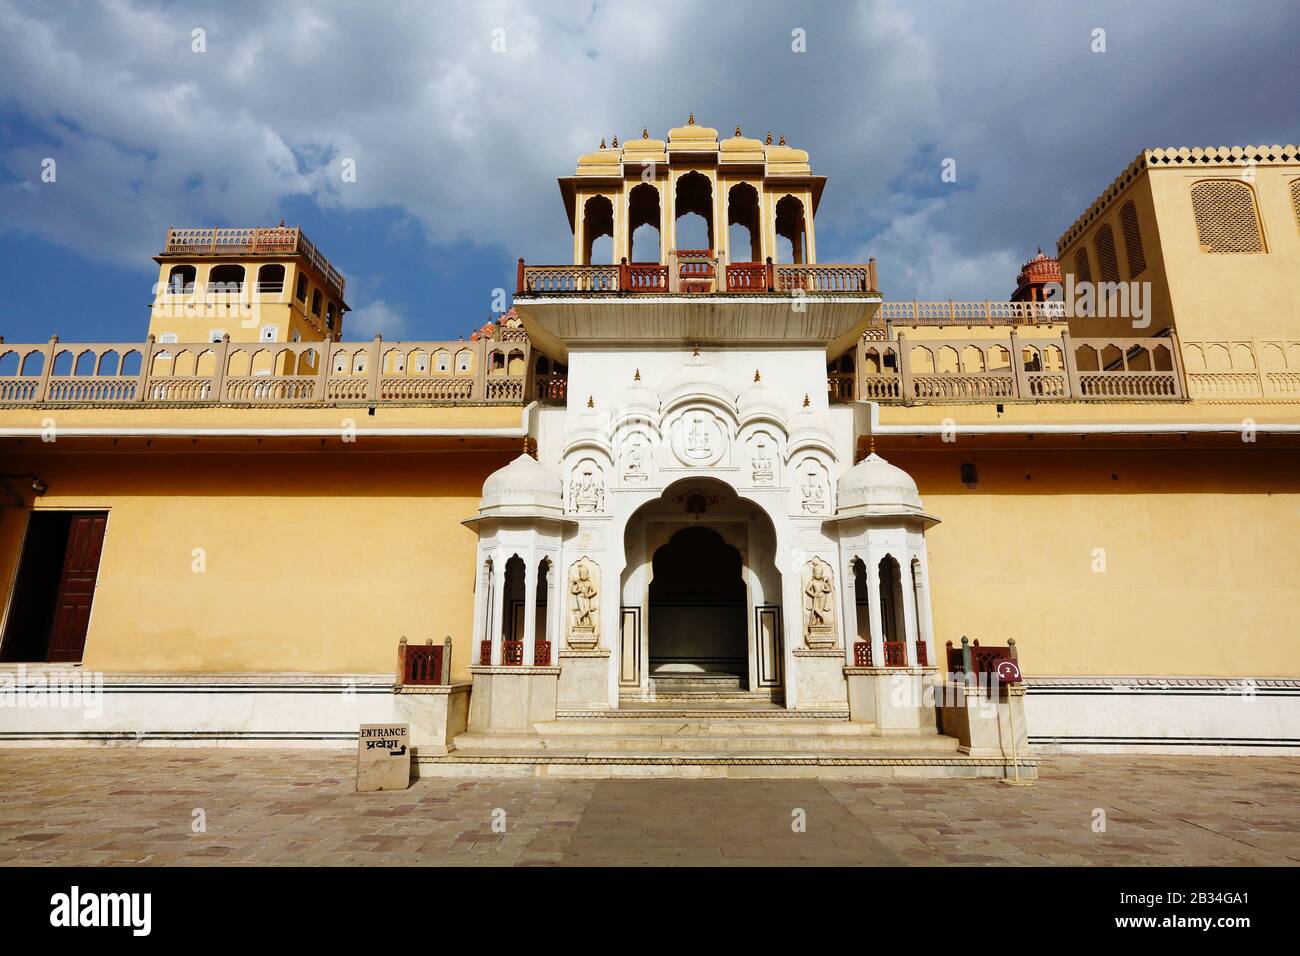 Decorated entrance gate to Palace of the Winds, Hawa Mahal, Jaipur, Rajasthan, India Stock Photo